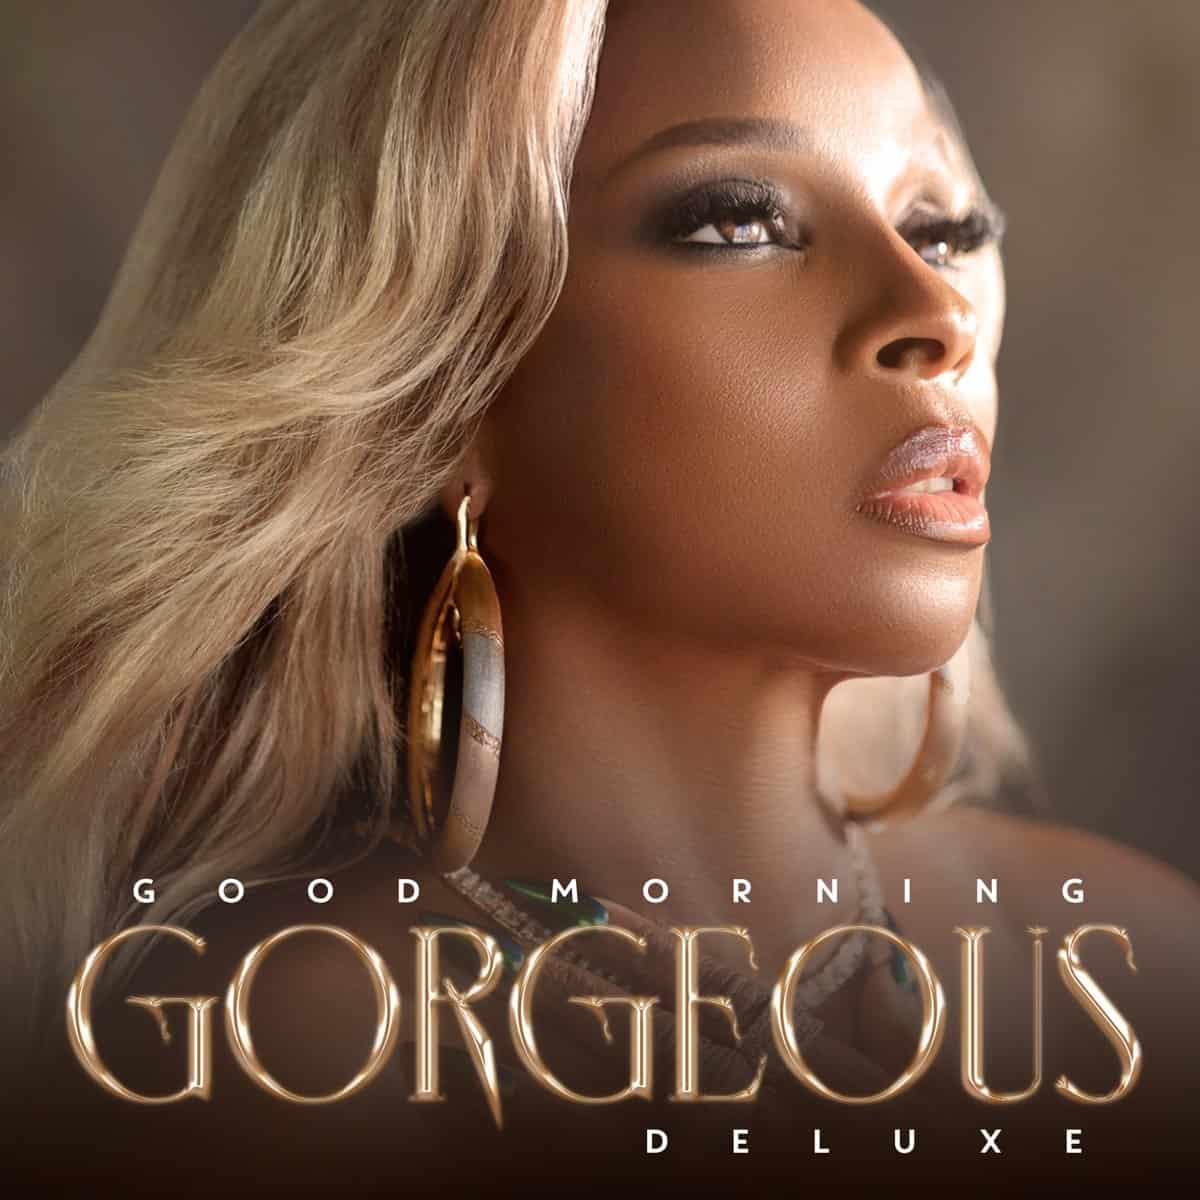 Mary J. Blige Drops 'Good Morning Gorgeous' Deluxe Version Featuring Fabolous, Jadakiss, H.E.R., and Moneybagg Yo